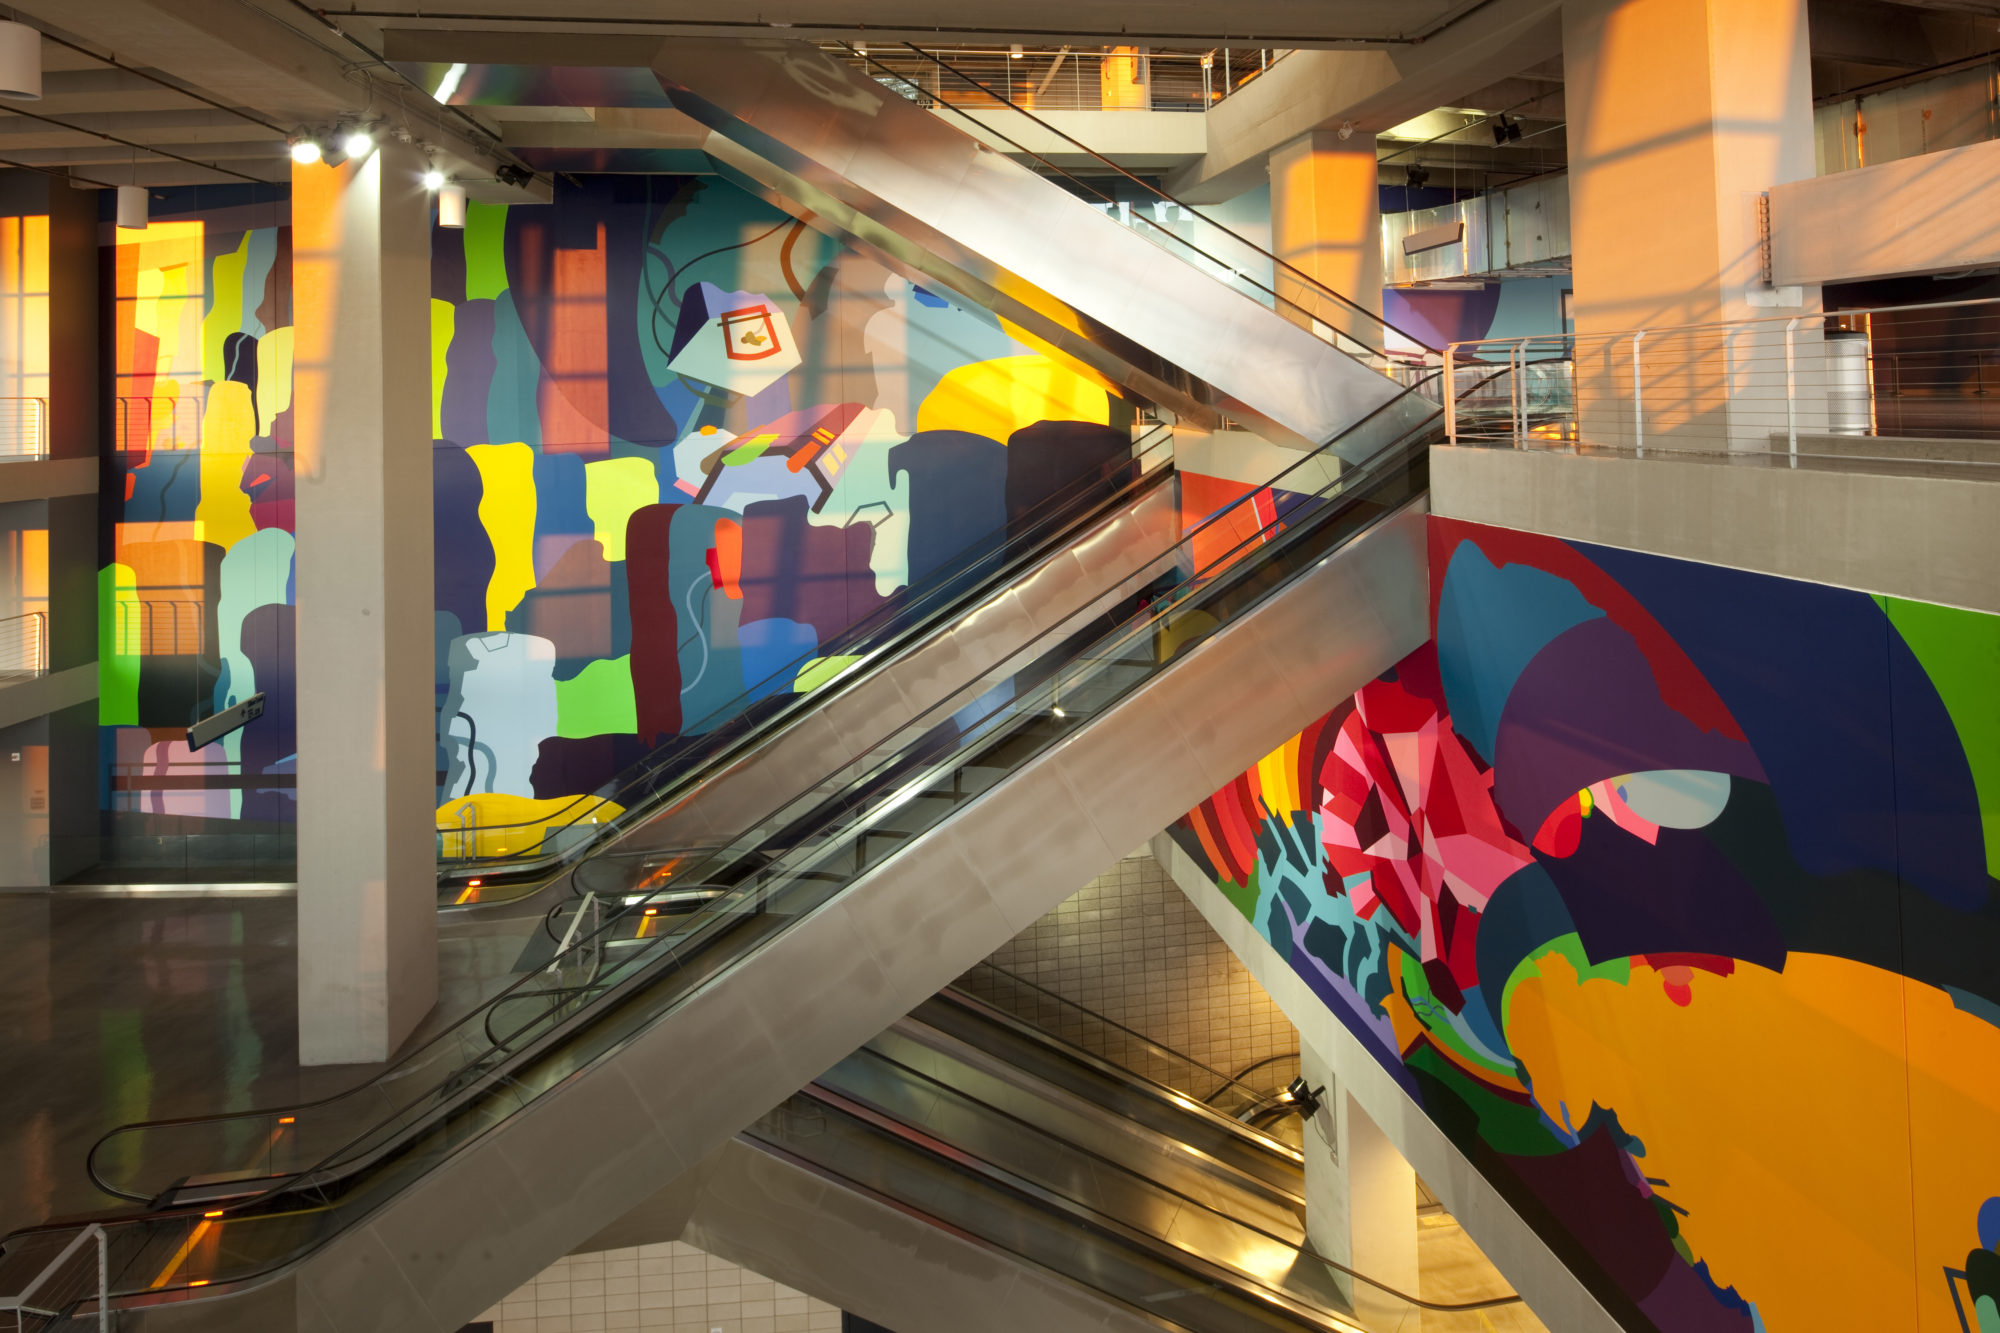 A view of natural light pouring onto an abstract mural made up of purple, yellow, orange, lime green, aqua, navy, cherry red, hot pink, maroon and lilac, covering the Southwest Monumental Staircase of the AT&T stadium.